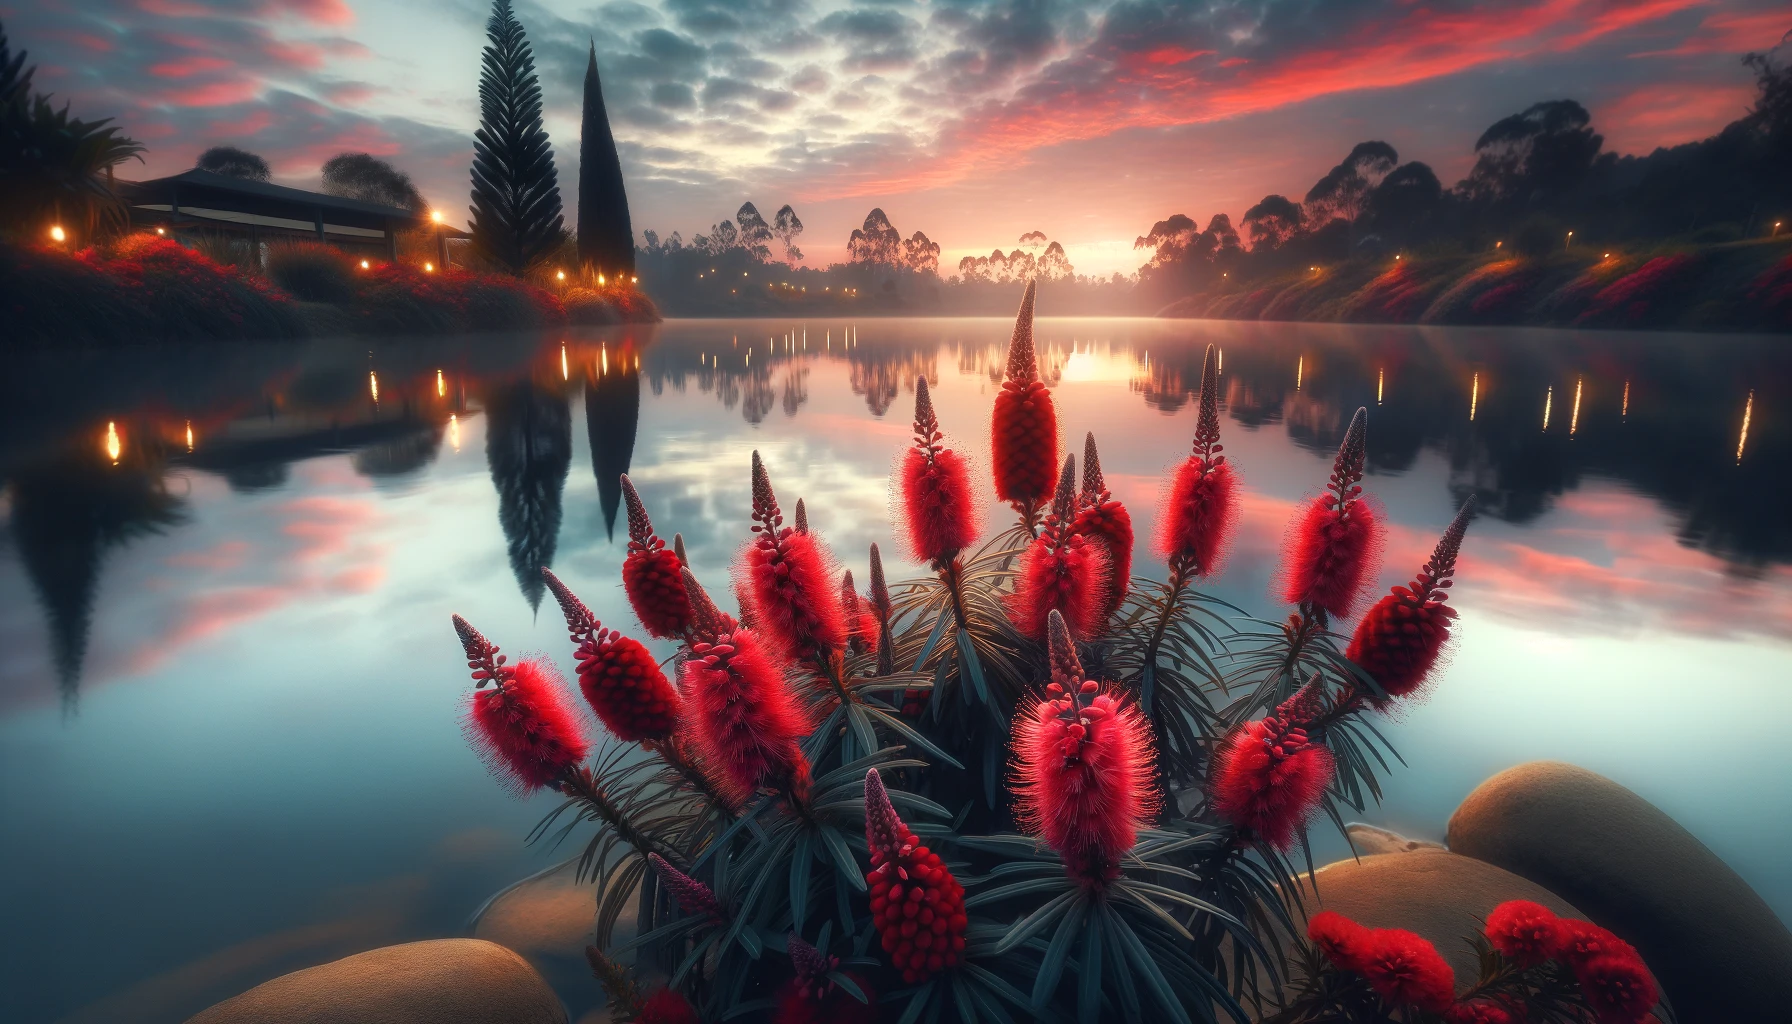 Sunset over tranquil lake with red flowers and reflections.